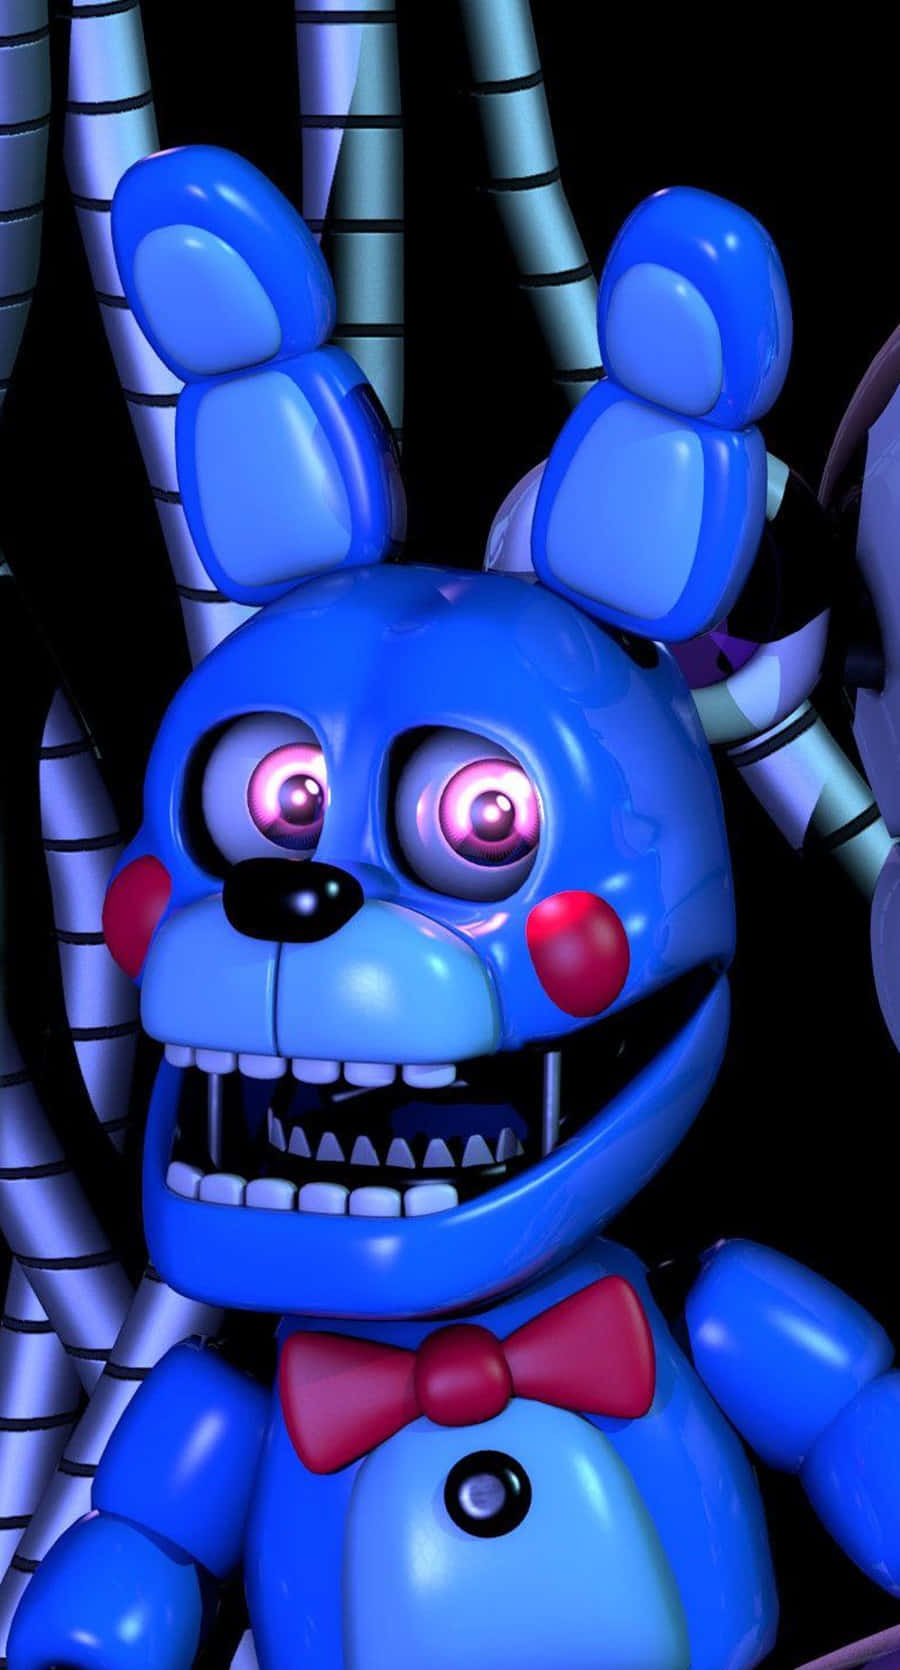 Get ready to be scared with Five Nights at Freddy’s for iPhone Wallpaper